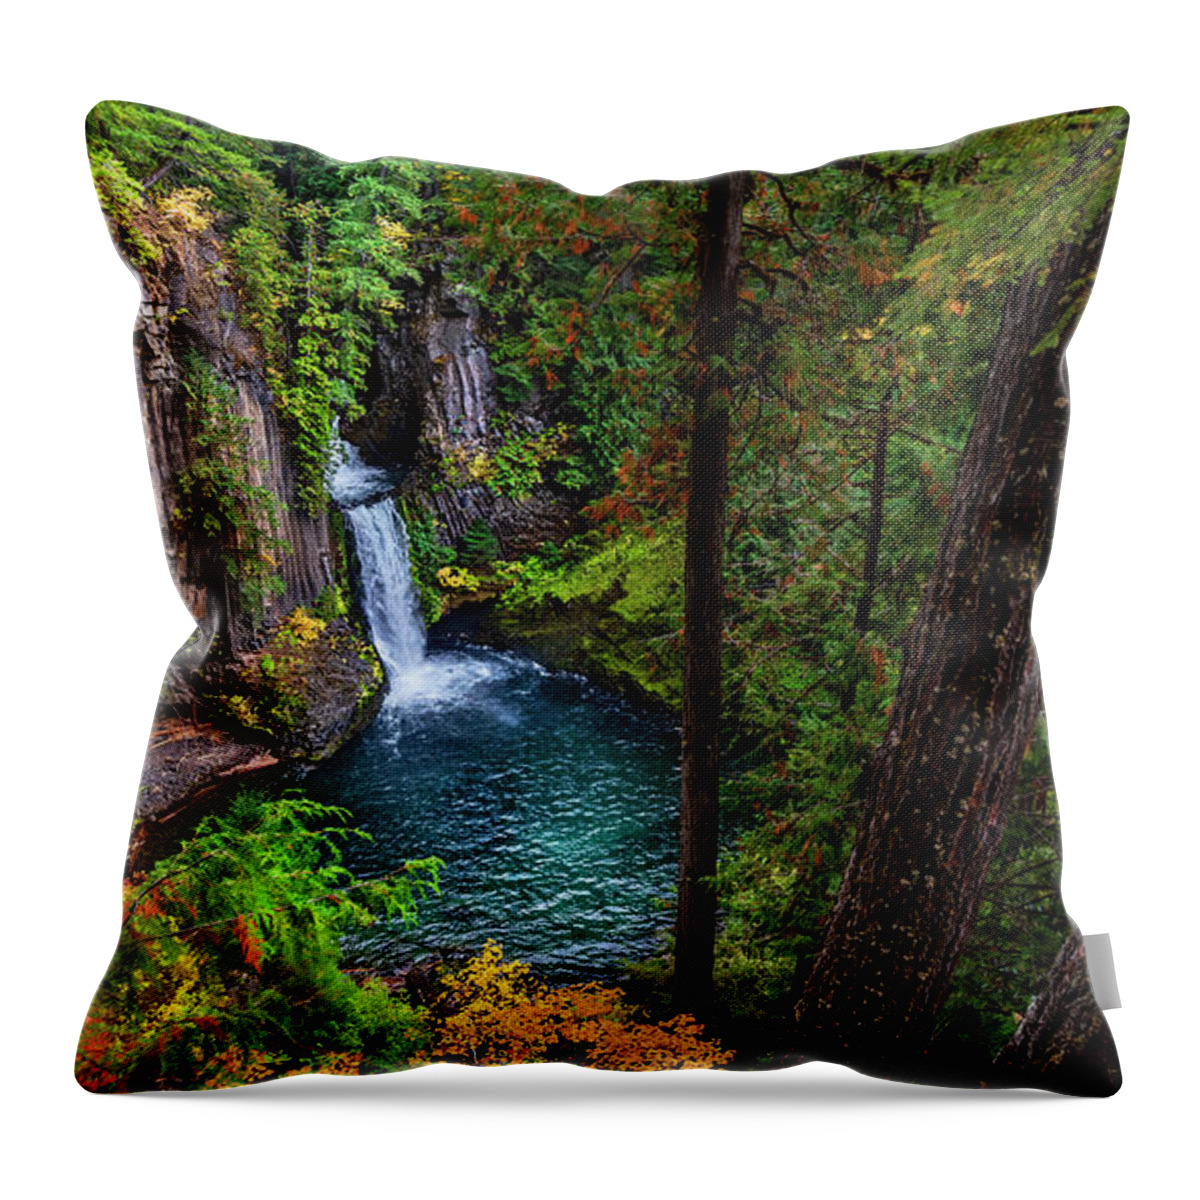 Toketee Falls Throw Pillow featuring the photograph Hidden Treasure by John Poon